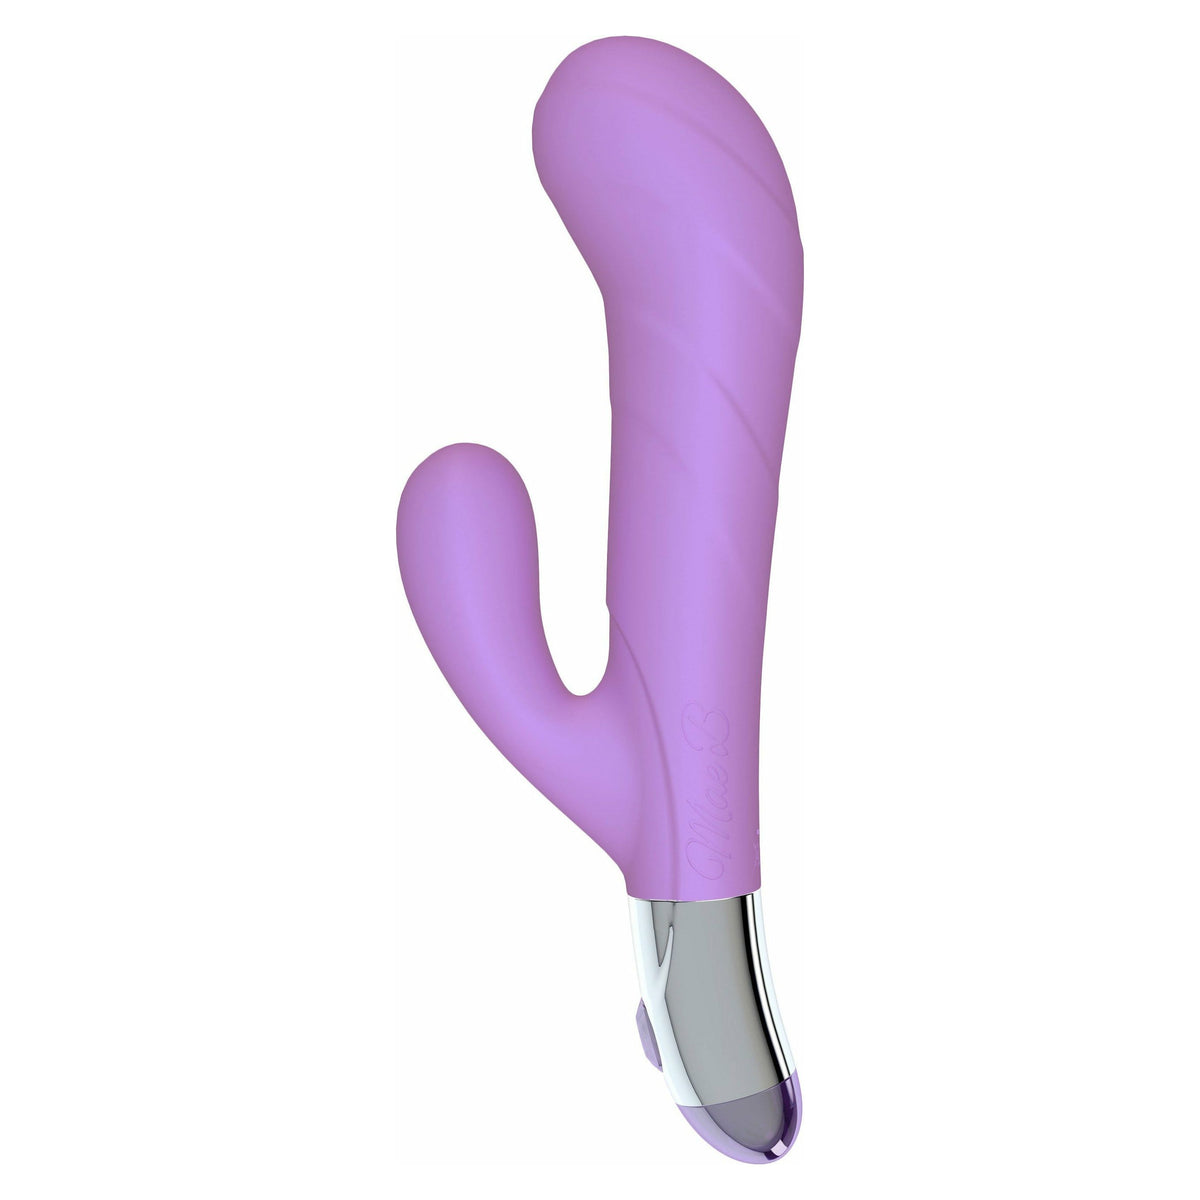 Mae B Lovely Vibes - G-Spot Shaped Soft Touch Twin Vibrator - Purple